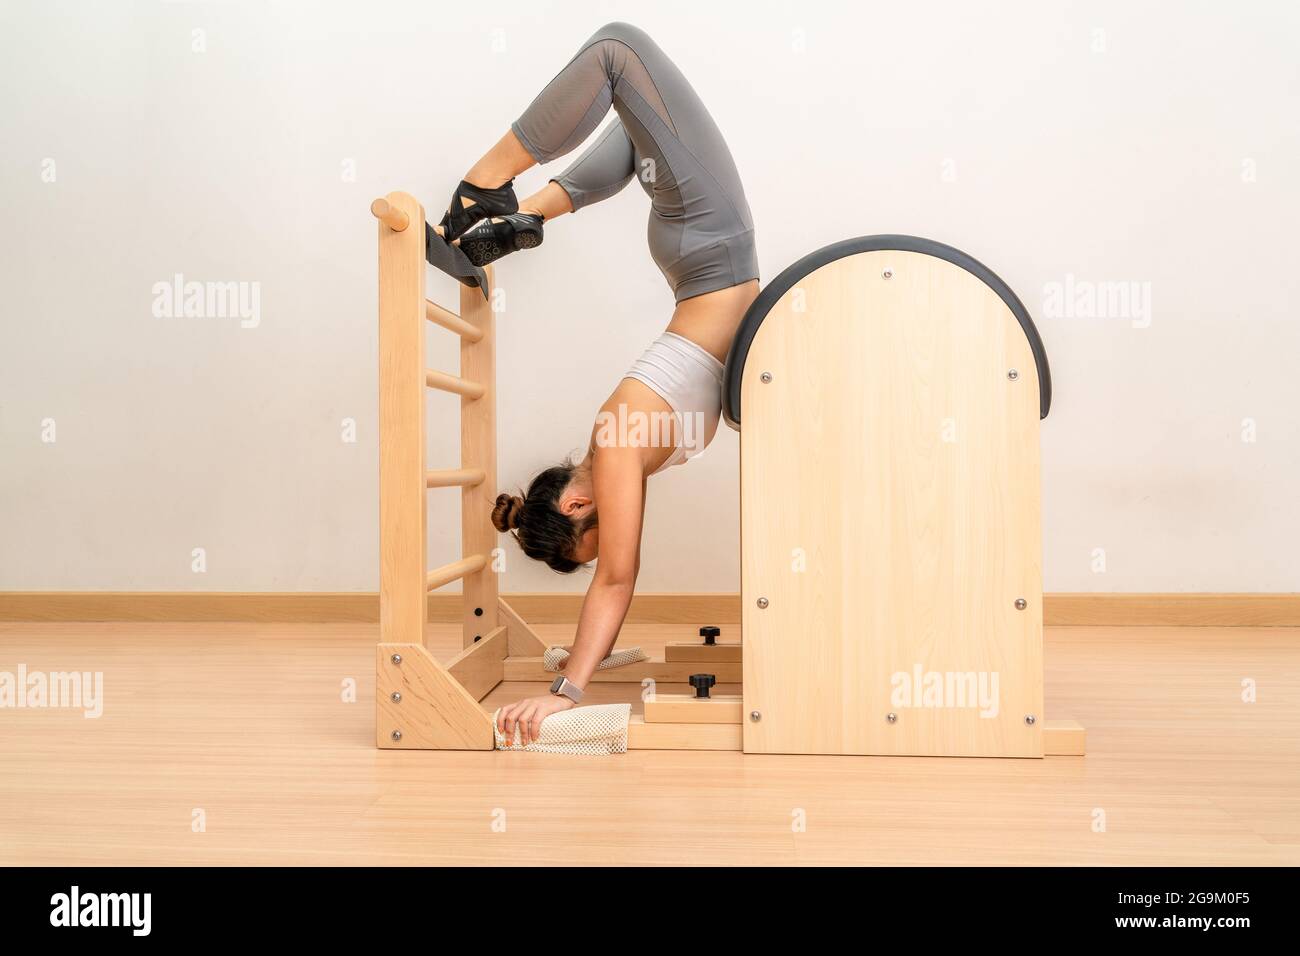 Young Asian woman working hand stand on pilates ladder barrel